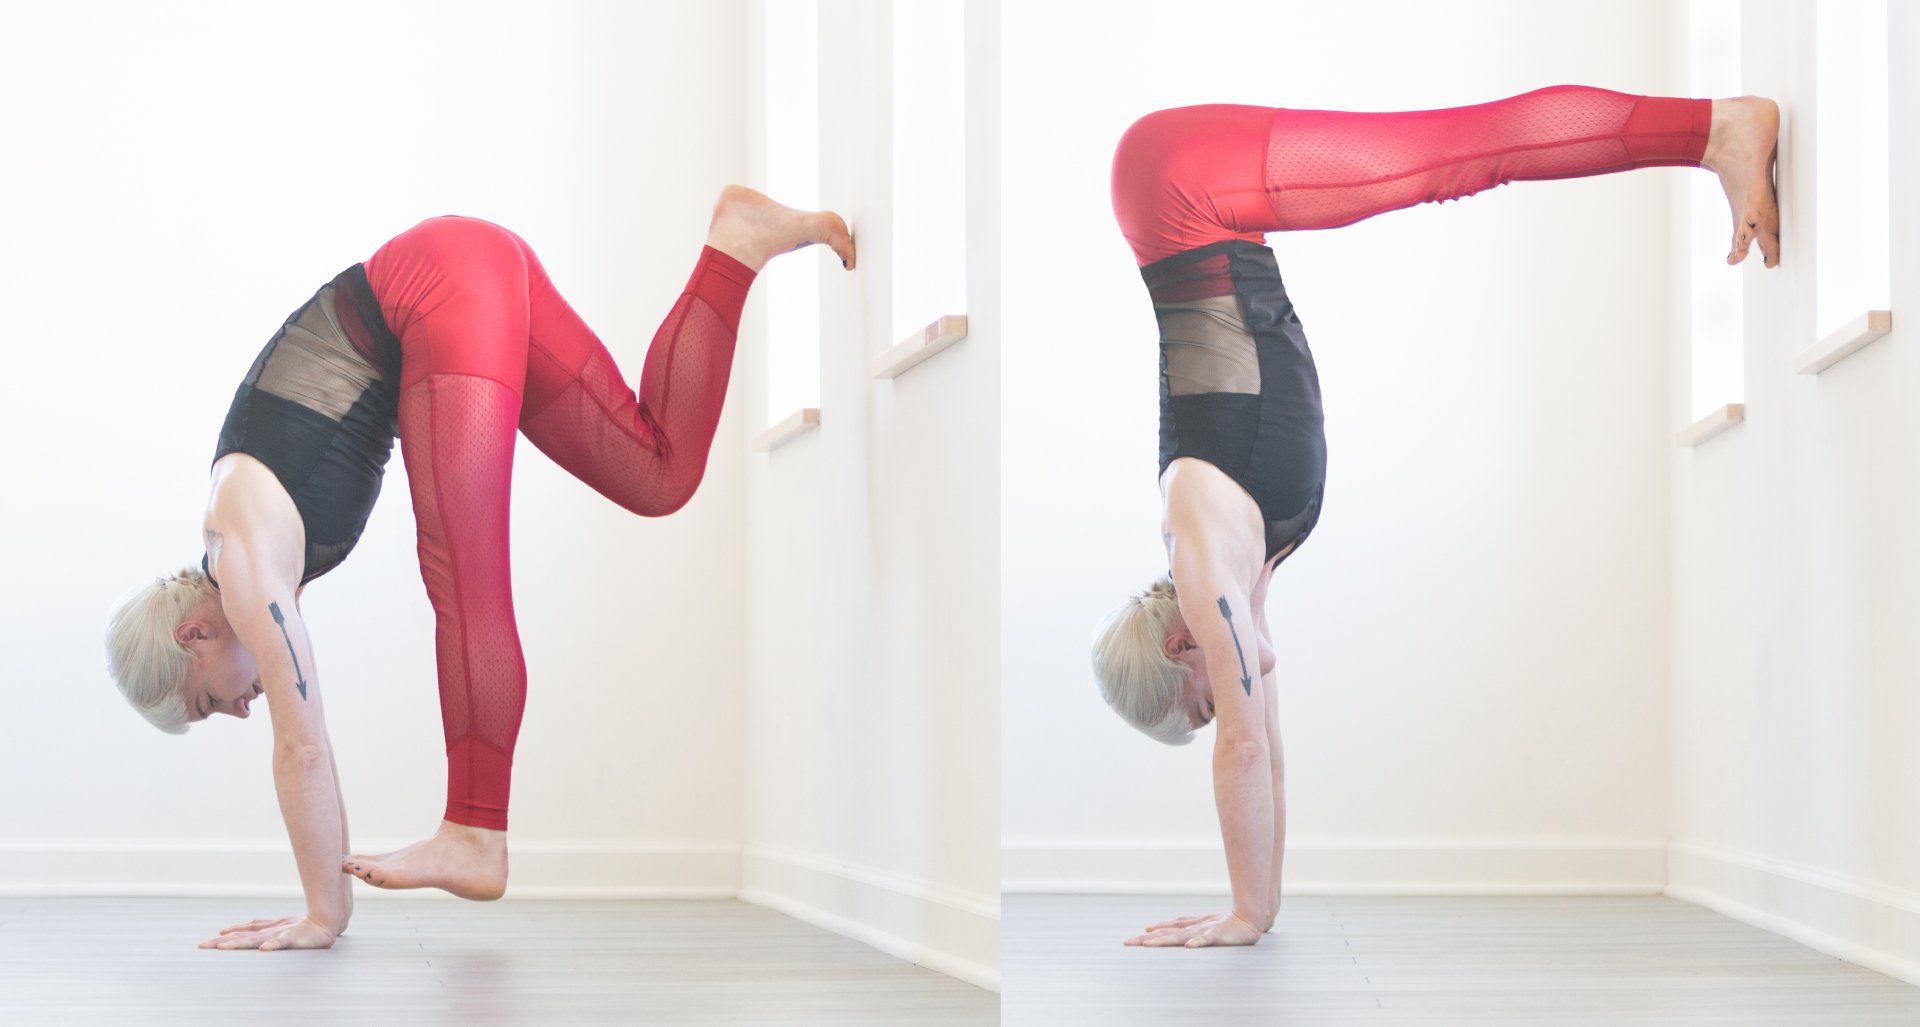 Covid-19: 6 wall yoga asanas you can do at home to stay fit | HealthShots